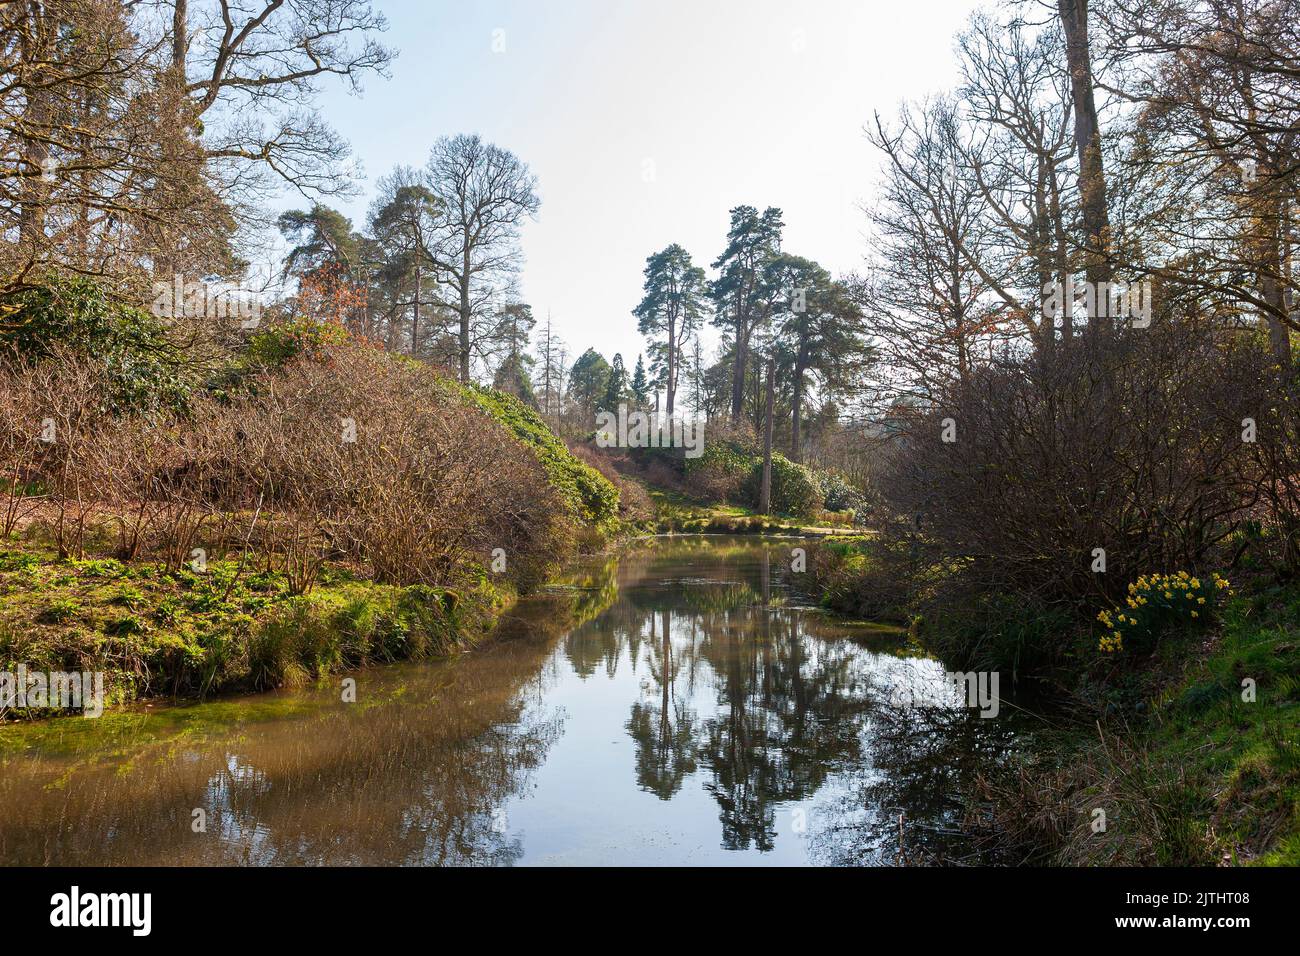 Clapper Pond, one of the Top Ponds in Leonardslee Gardens, West Sussex, UK, in early Spring Stock Photo